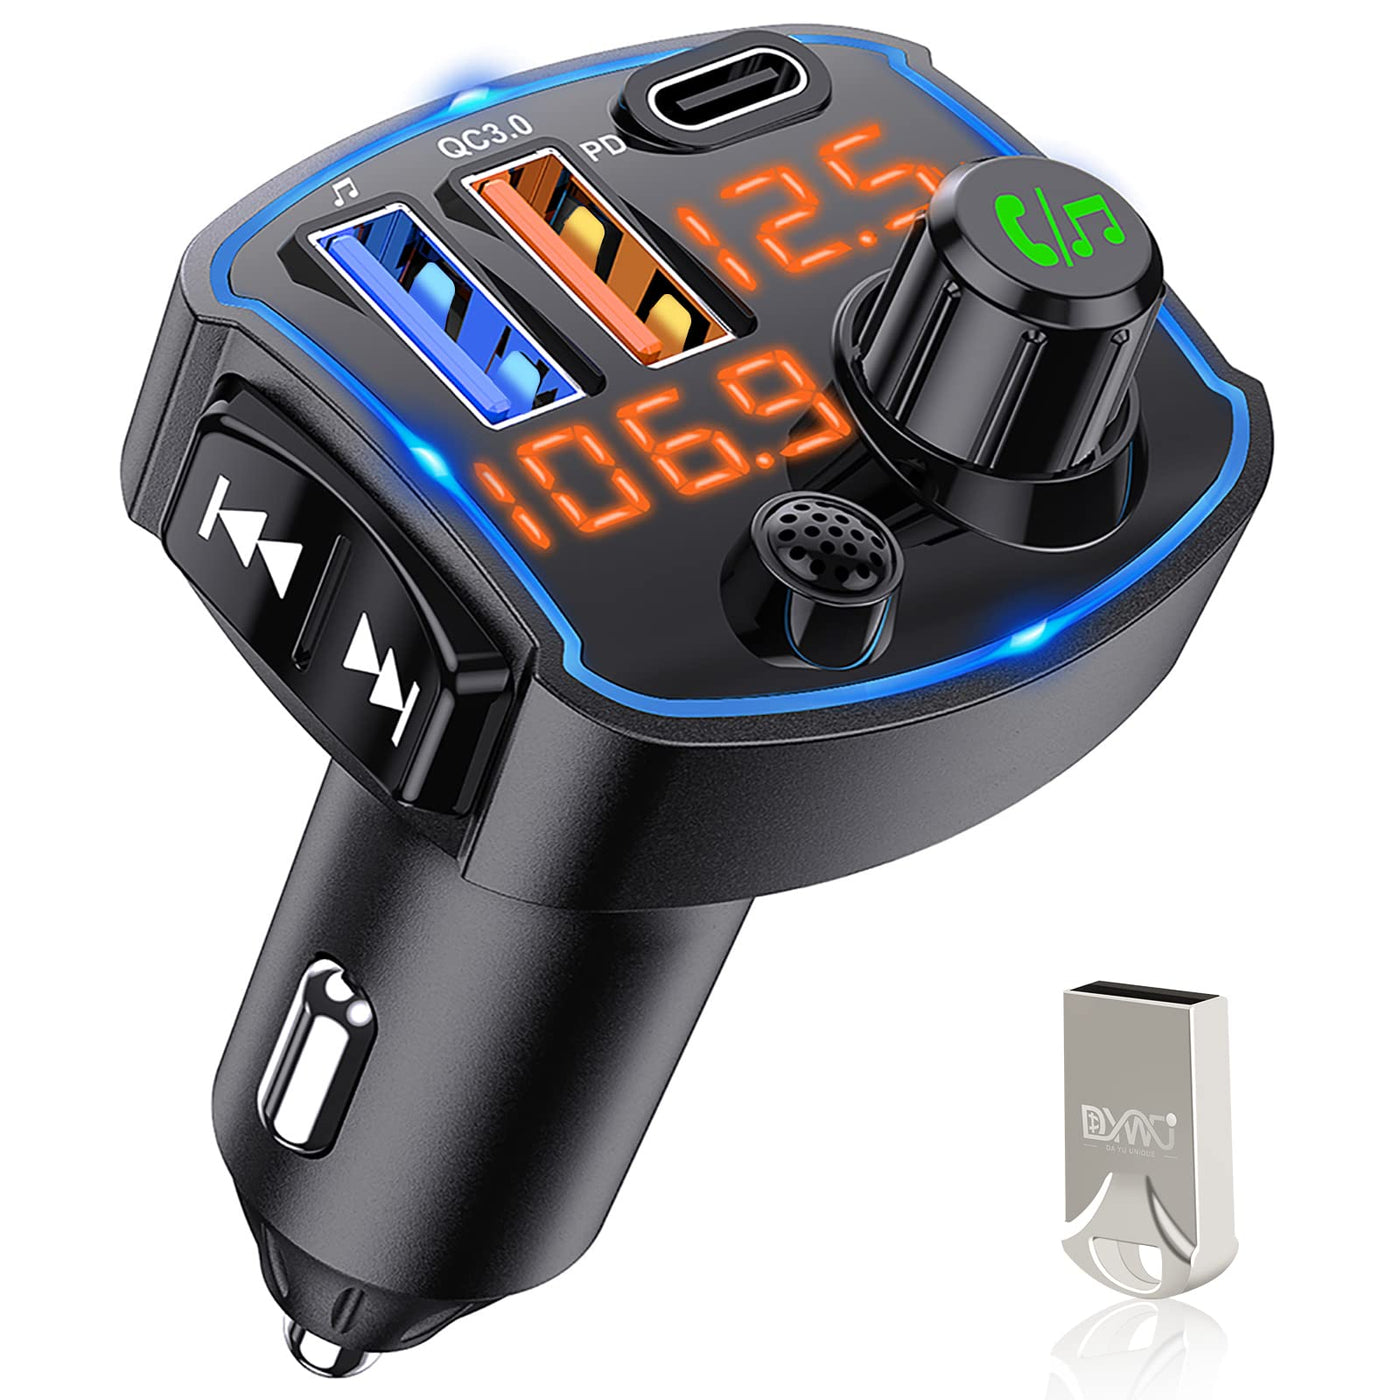 Bluetooth FM Transmitter for Car Adapter, 41W PD3.0 and QC3.0 Fast Charging  U Disk Player Included 32G Flash Drive Hands-Free Calling Bluetooth 5.0  Music Play Mode Dual Screen Display